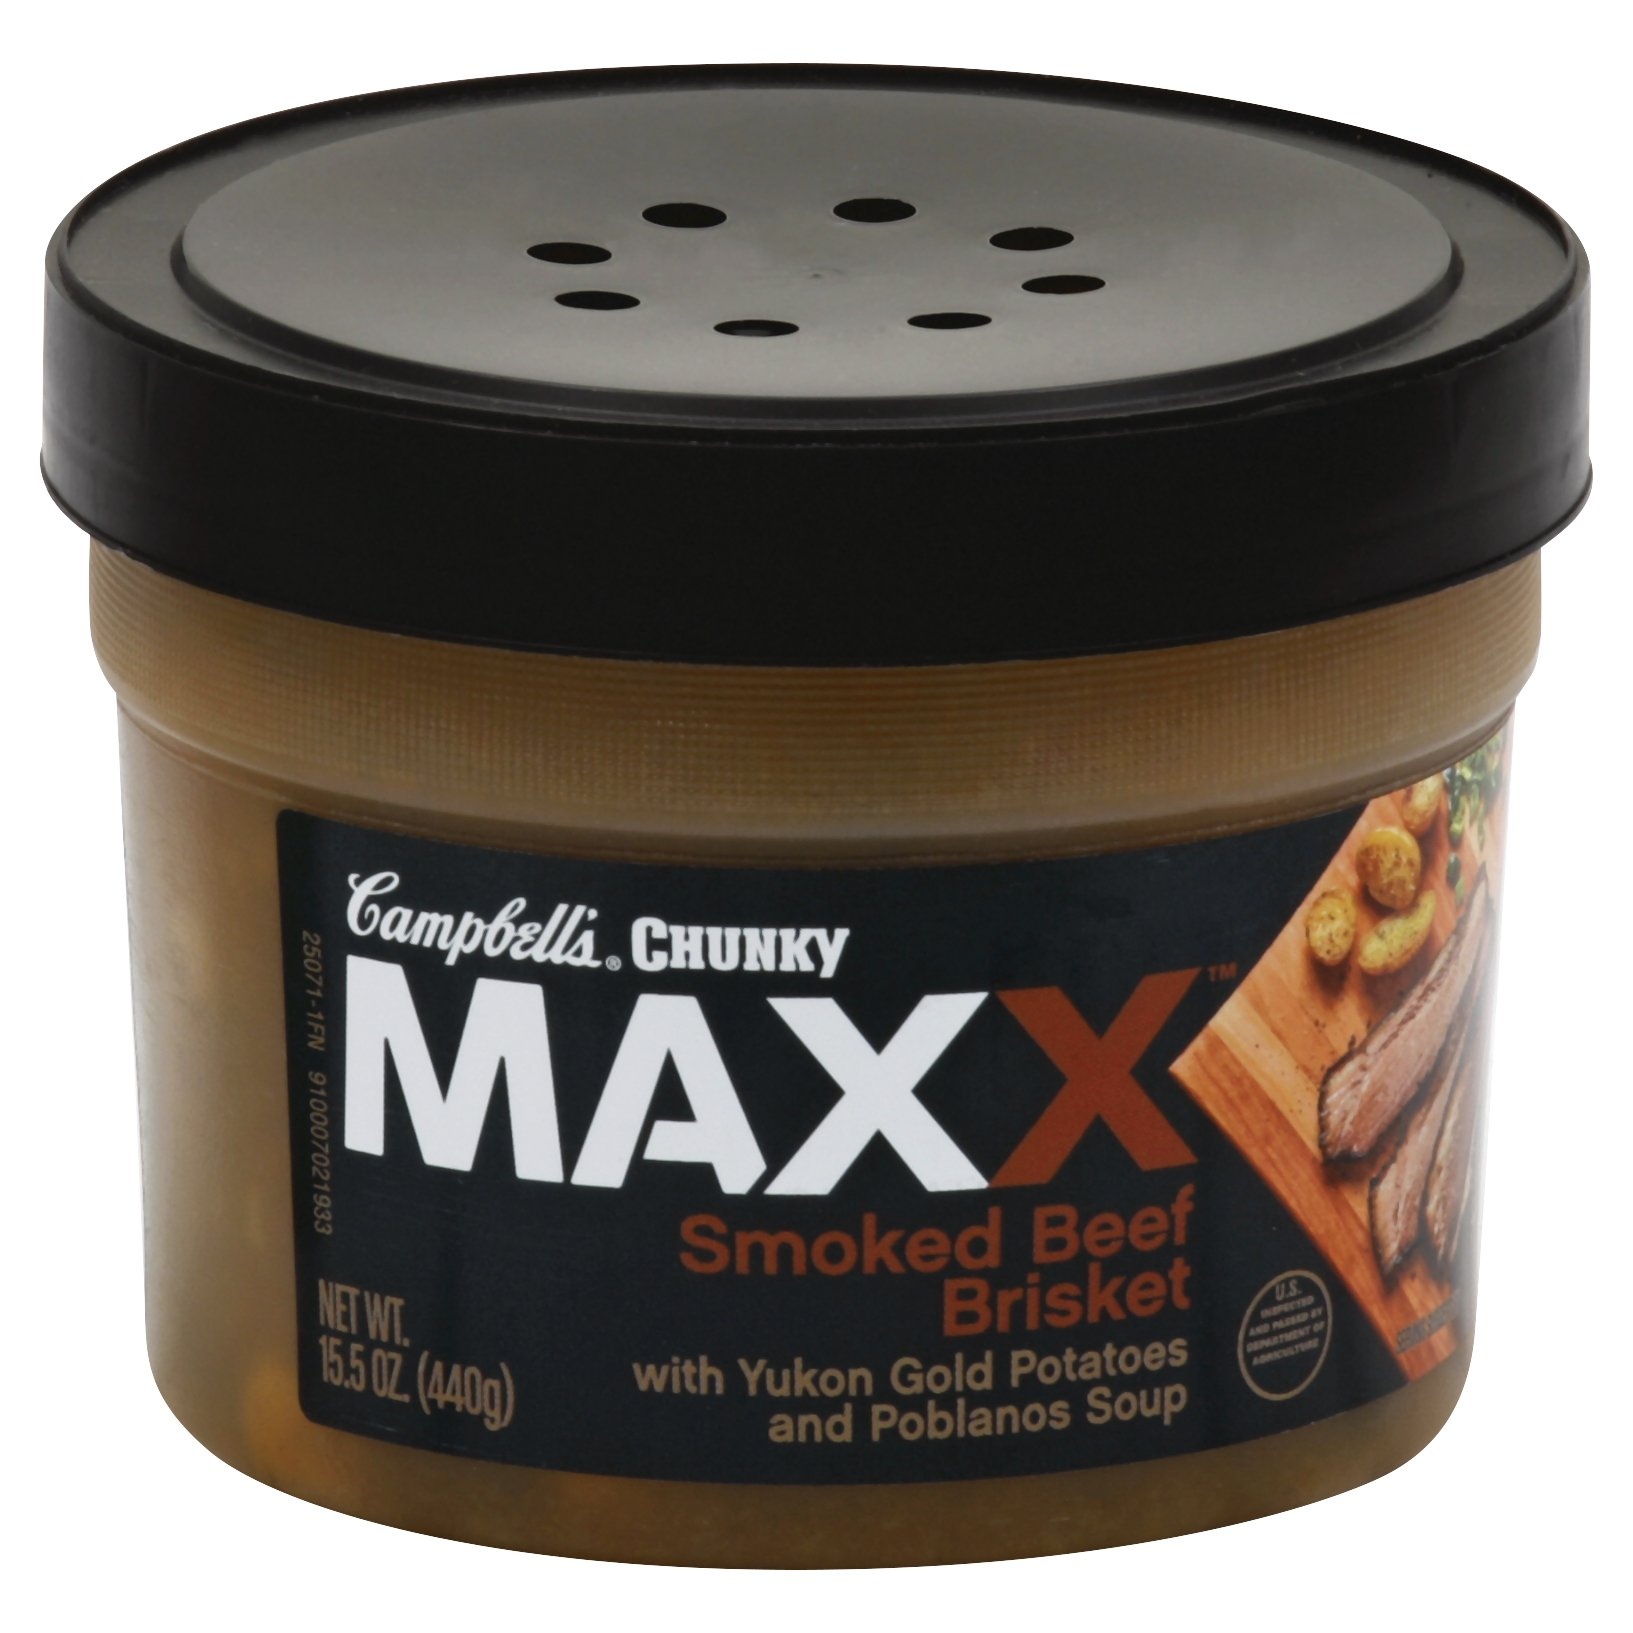 slide 1 of 1, Campbell's Chunky Maxx Smoked Beef Brisket, 15.5 oz